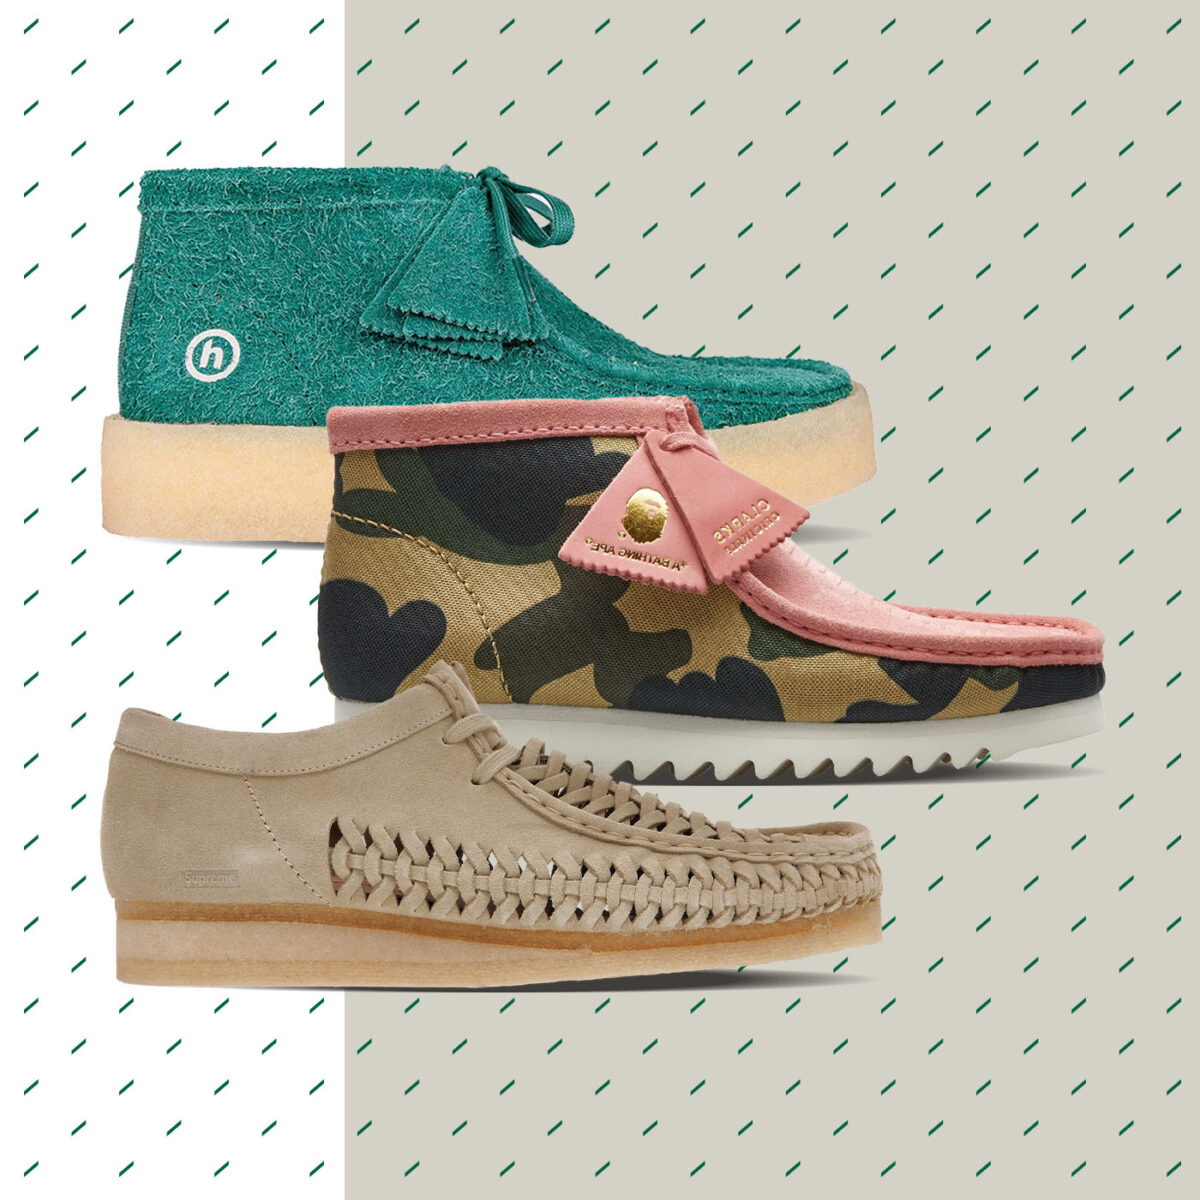 Serpiente Chelín Mal The Buyer's Guide: Clarks Shoes - StockX News